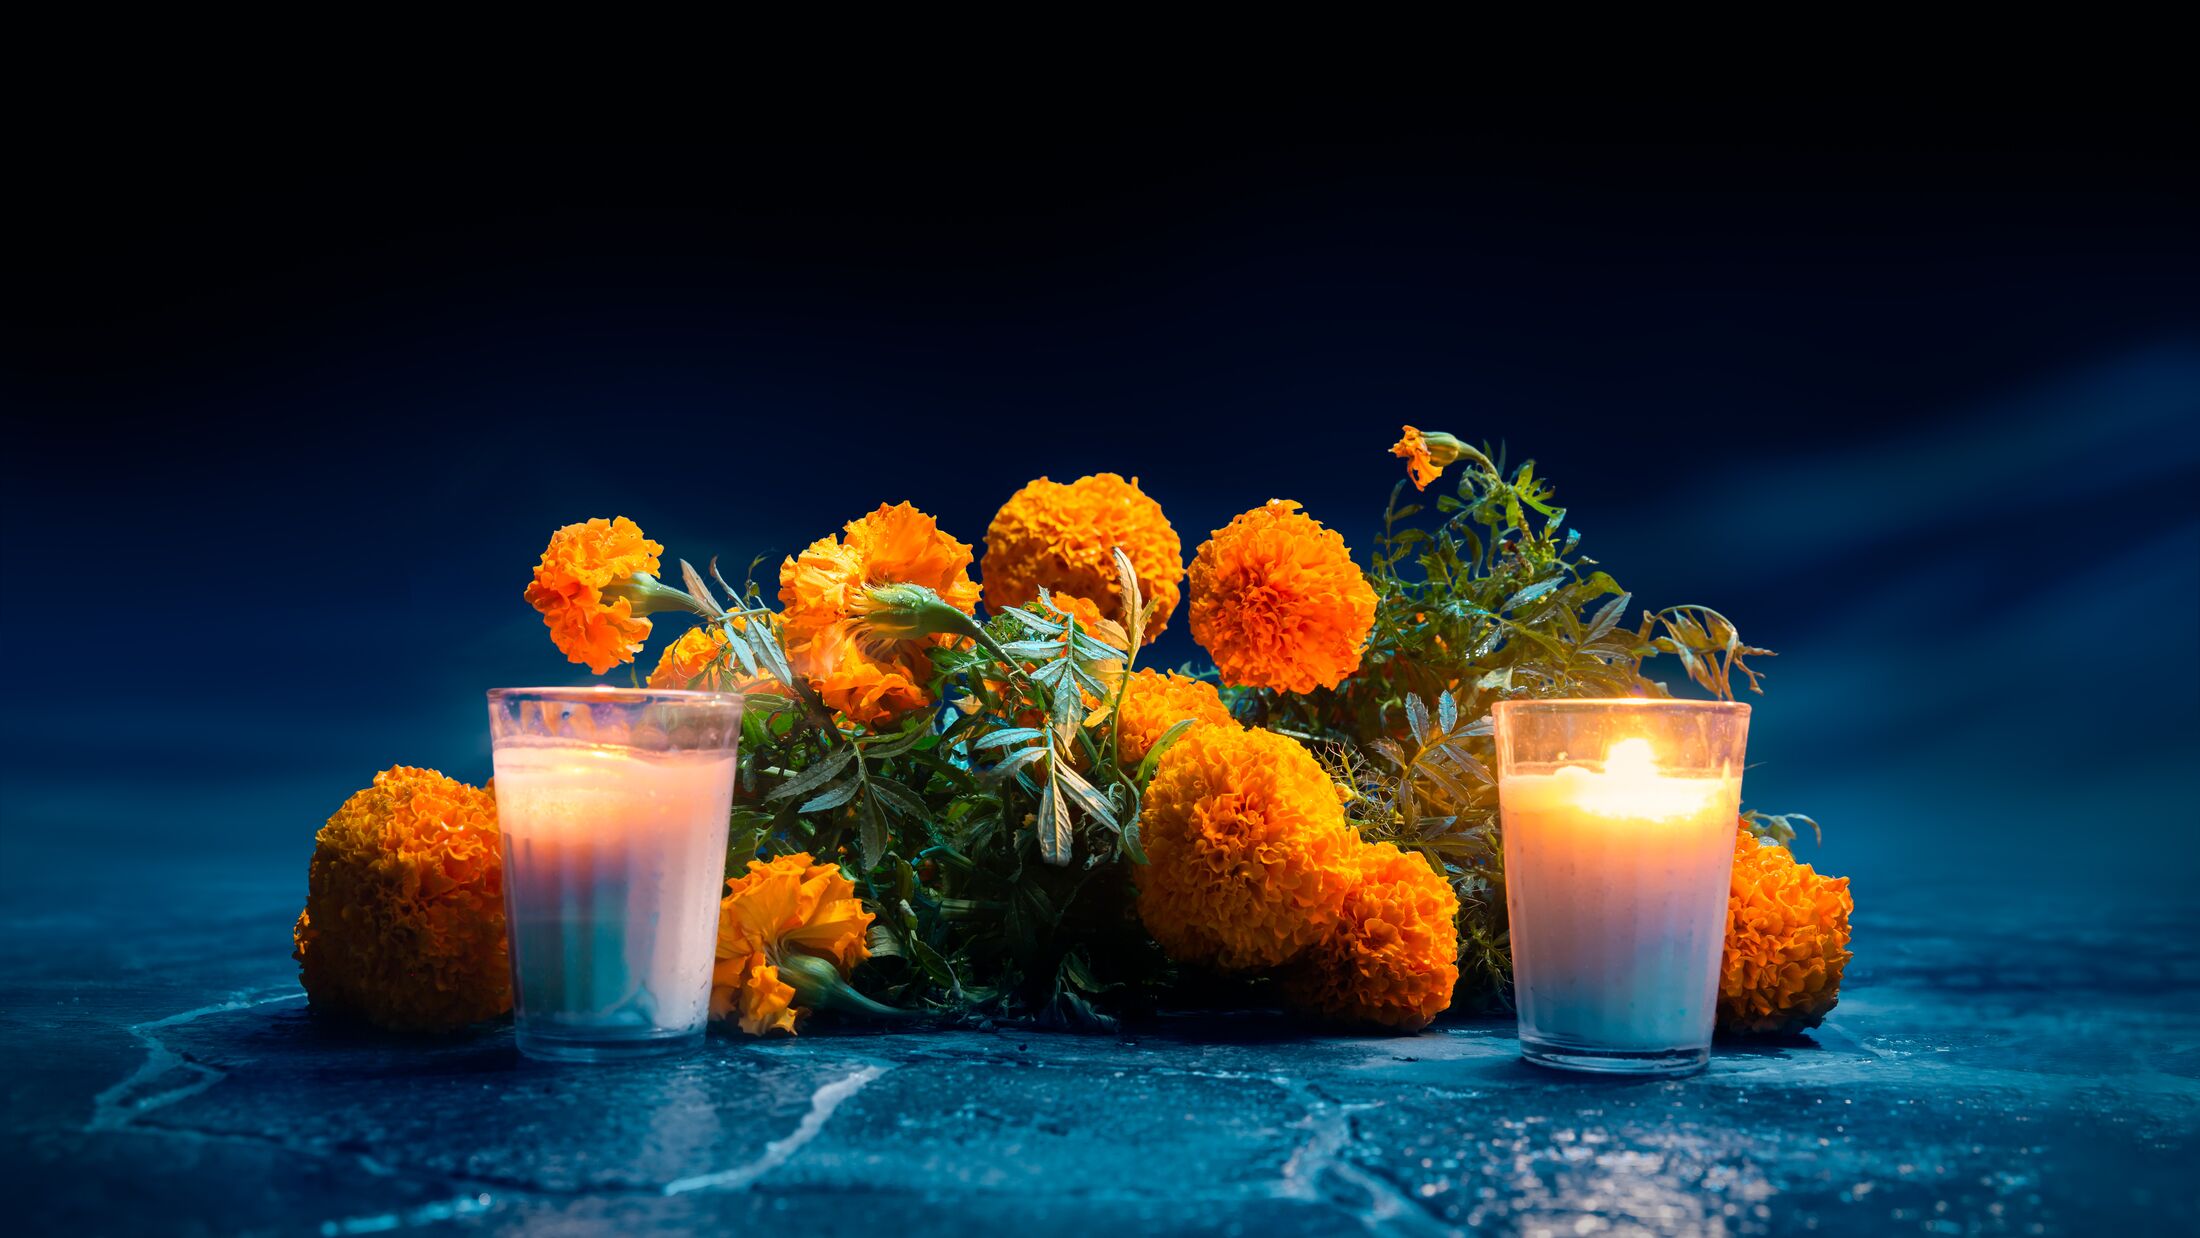 Flowers of "cempasuchil" or marigold used for mexican altars at day of the day